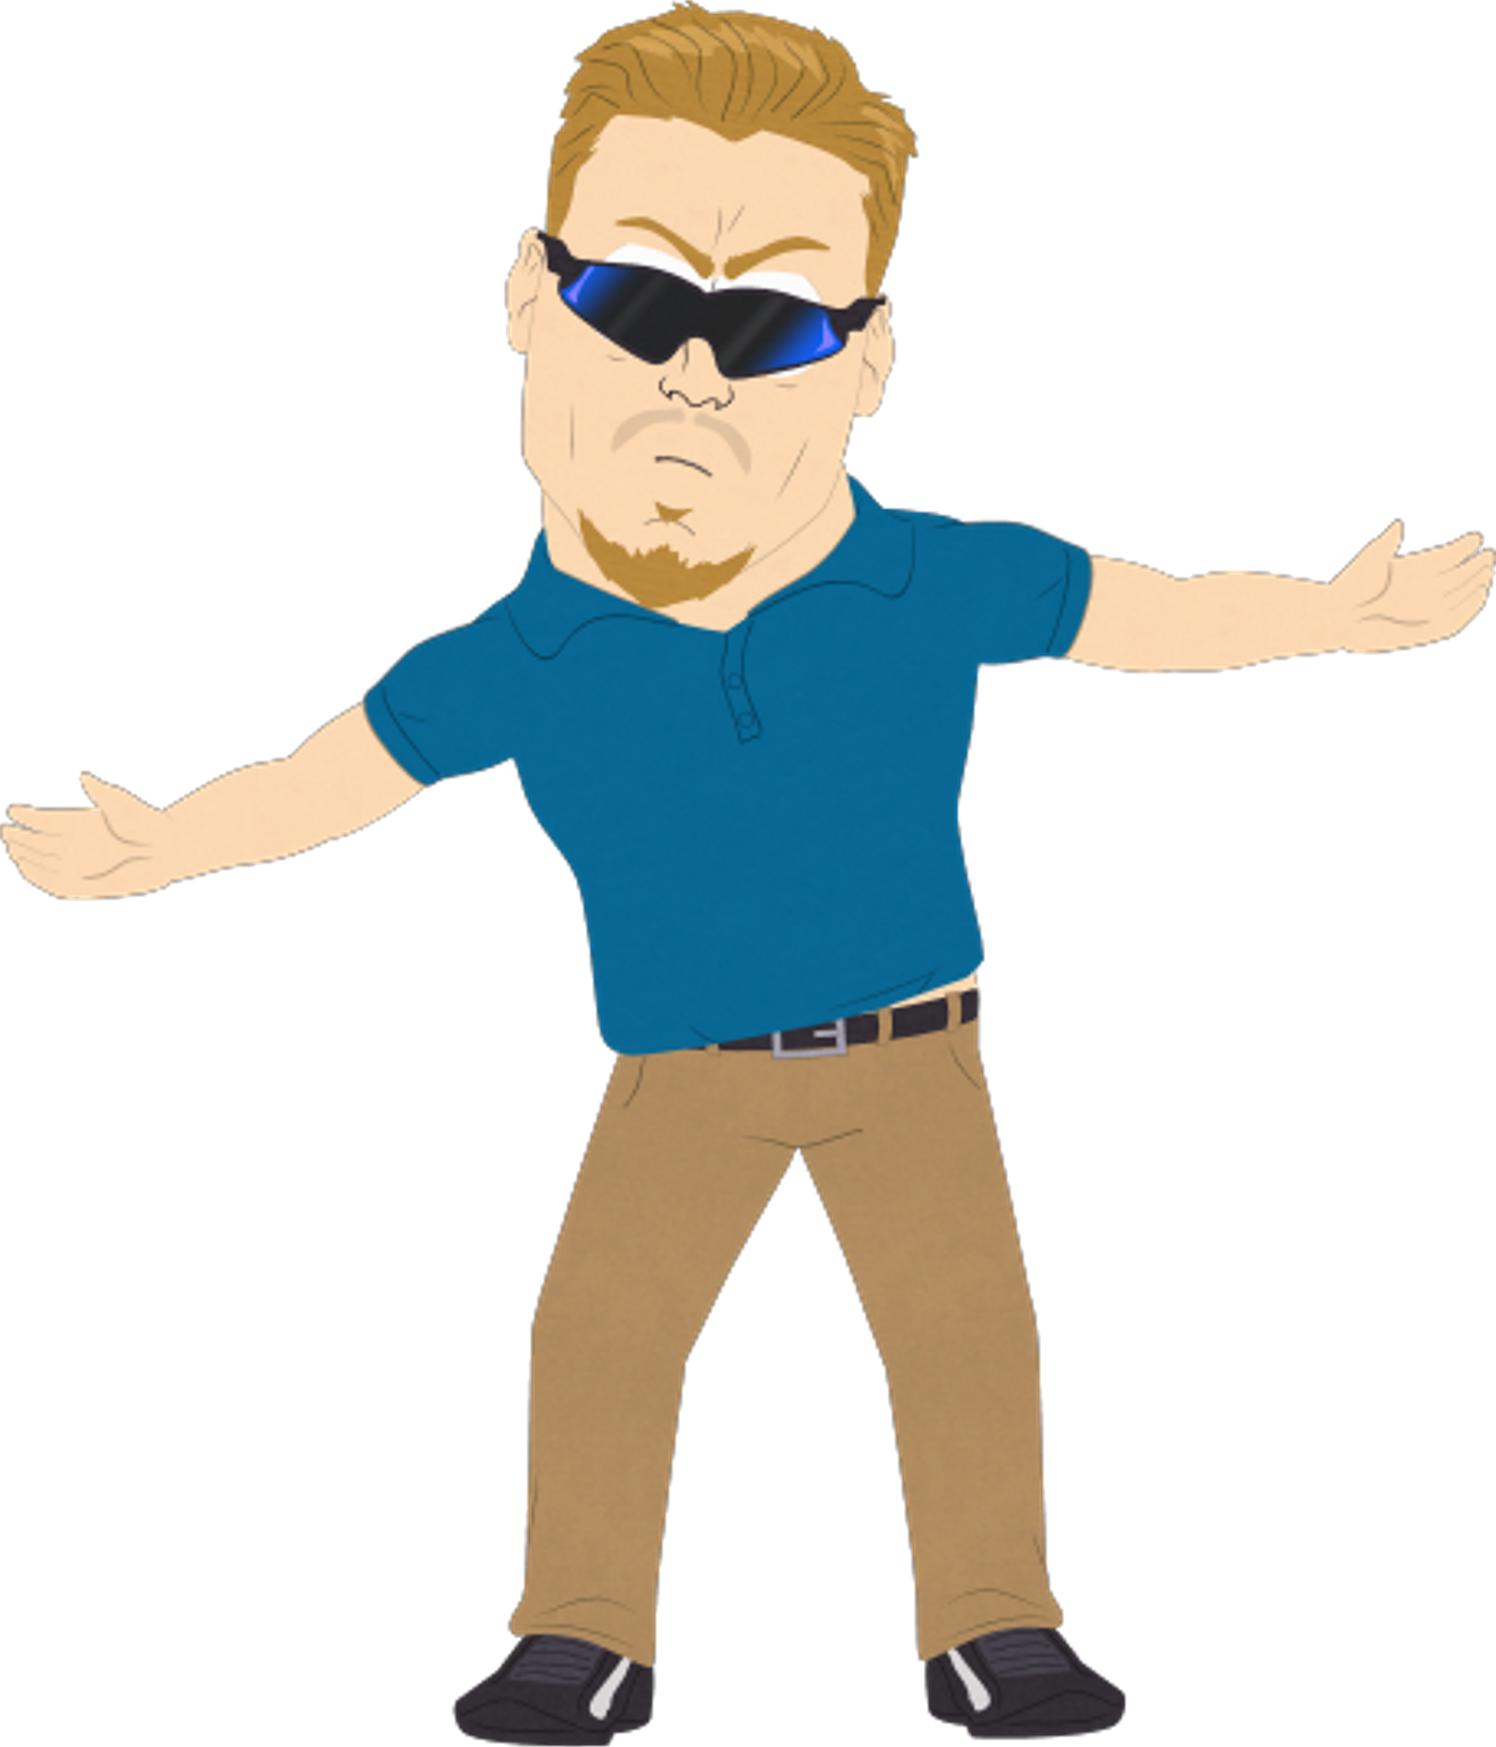 Pc south park archives. Working clipart vice principal